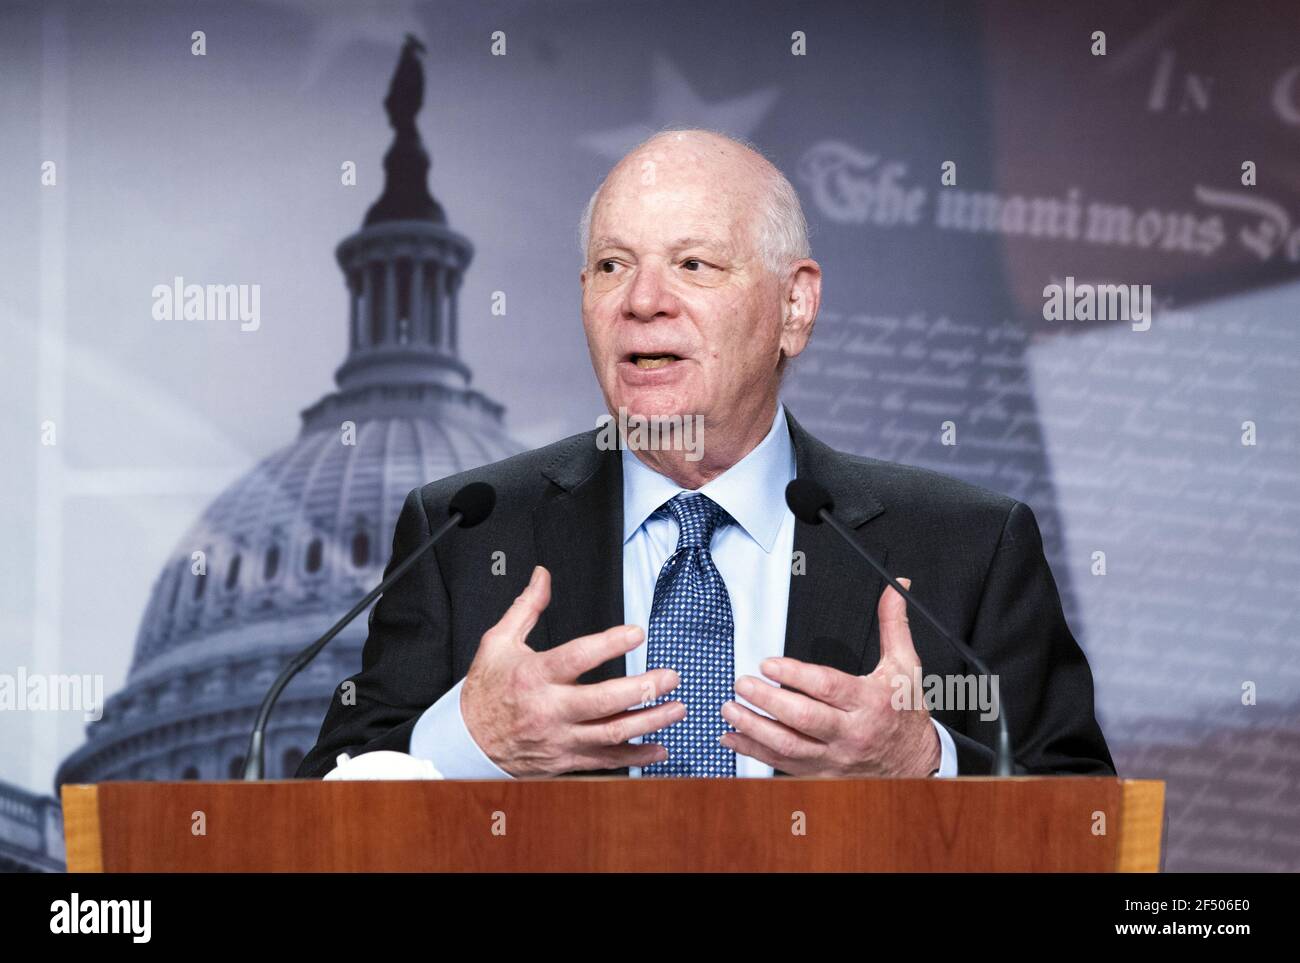 Washington, United States. 23rd Mar, 2021. Sen. Ben Cardin, D-MD, speaks during a press conference on Capitol Hill in Washington, DC on Tuesday, March 23, 2021. Cardin spoke on the need for extended COIVD-19 financial relief for small businesses. Photo by Kevin Dietsch/UPI Credit: UPI/Alamy Live News Stock Photo